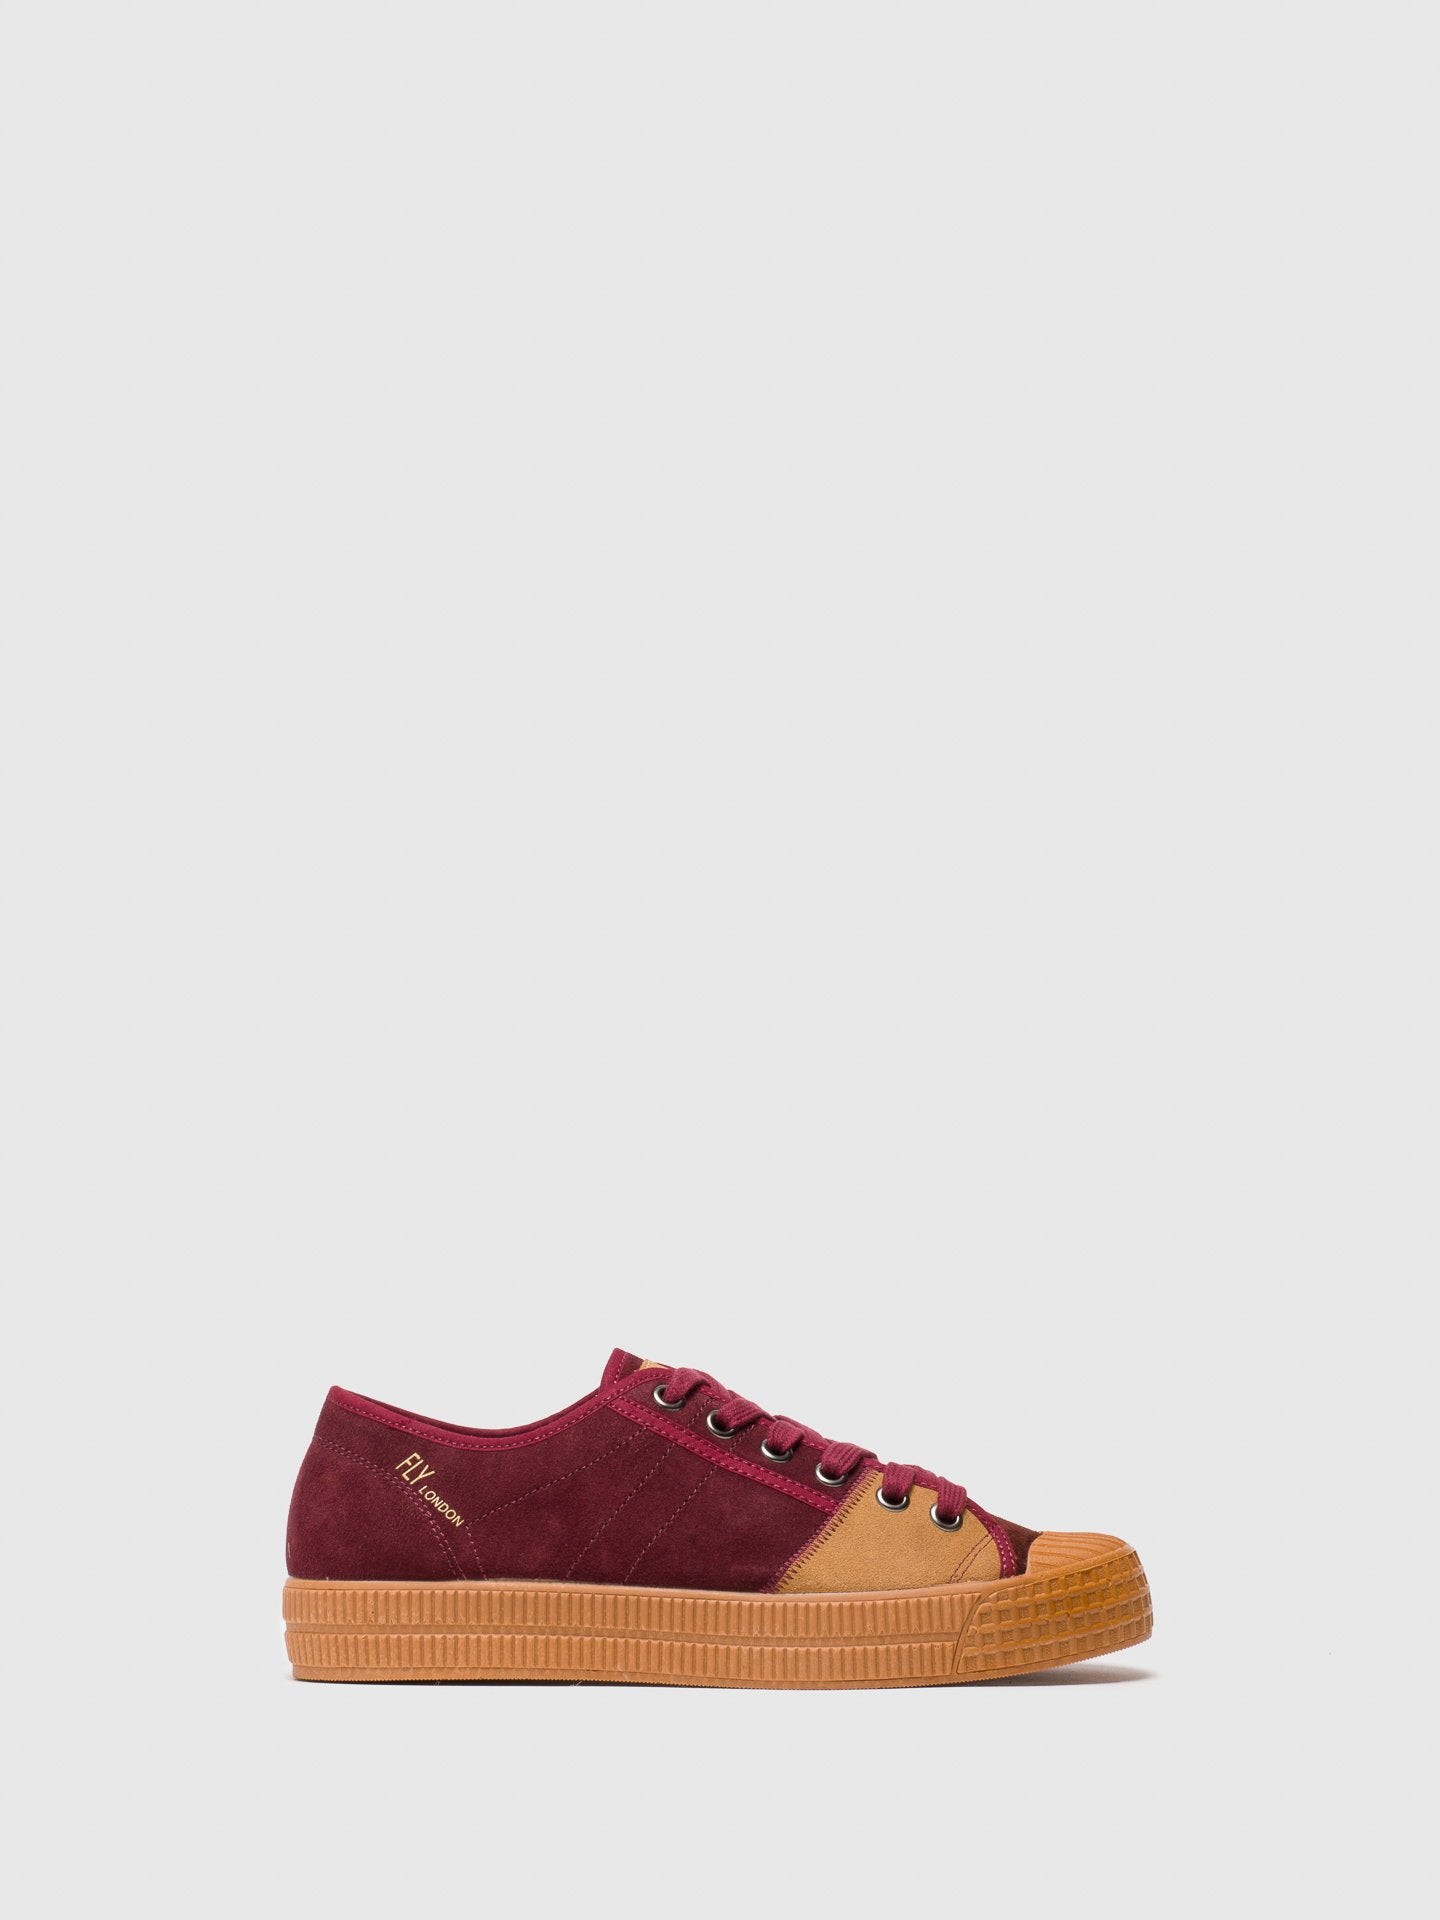 Fly London DarkRed Low-Top Trainers